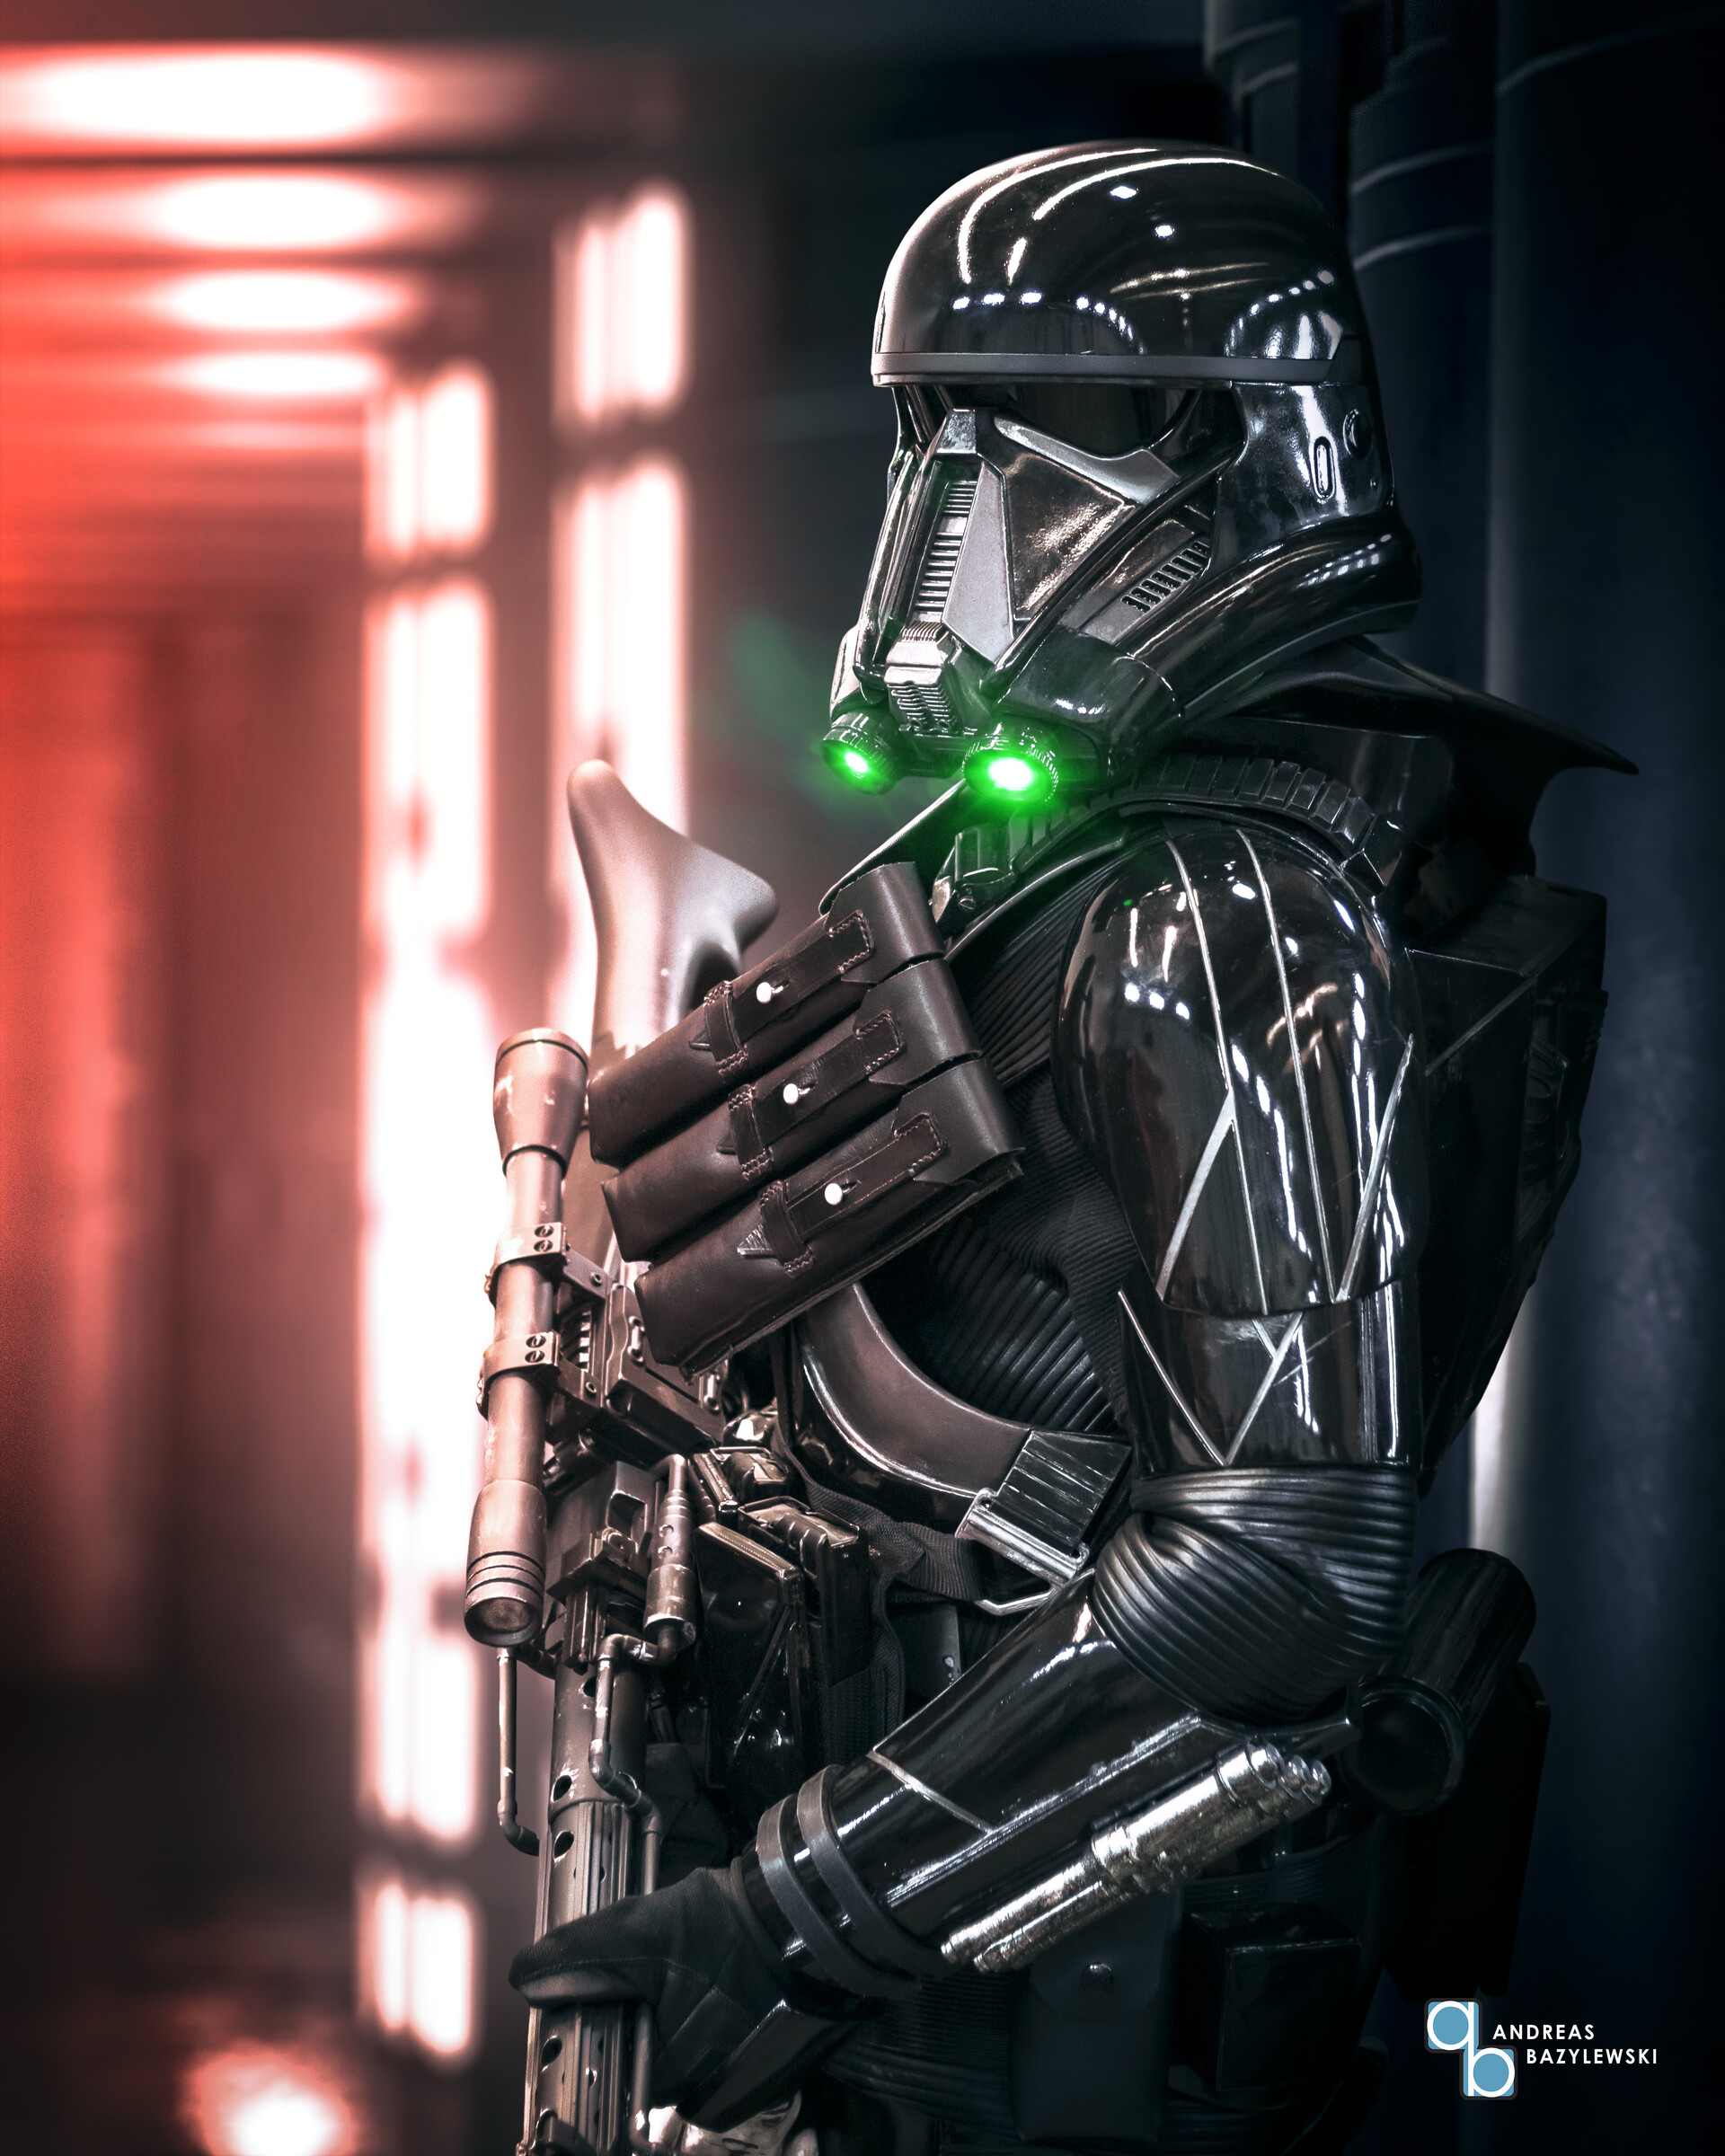 Death Troopers Wallpapers